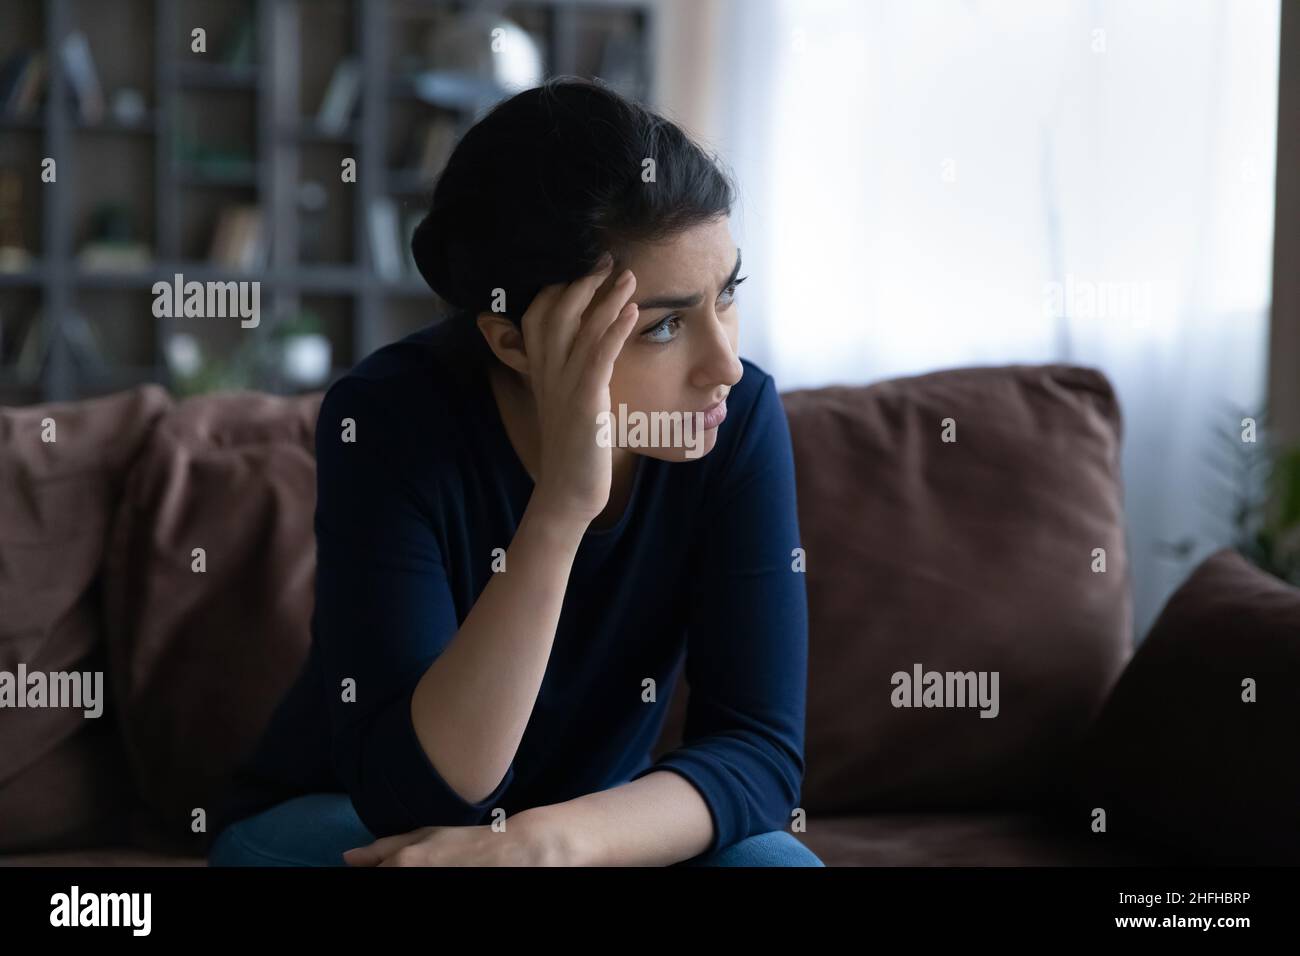 Puzzled unhappy young Indian woman looking in distance. Stock Photo